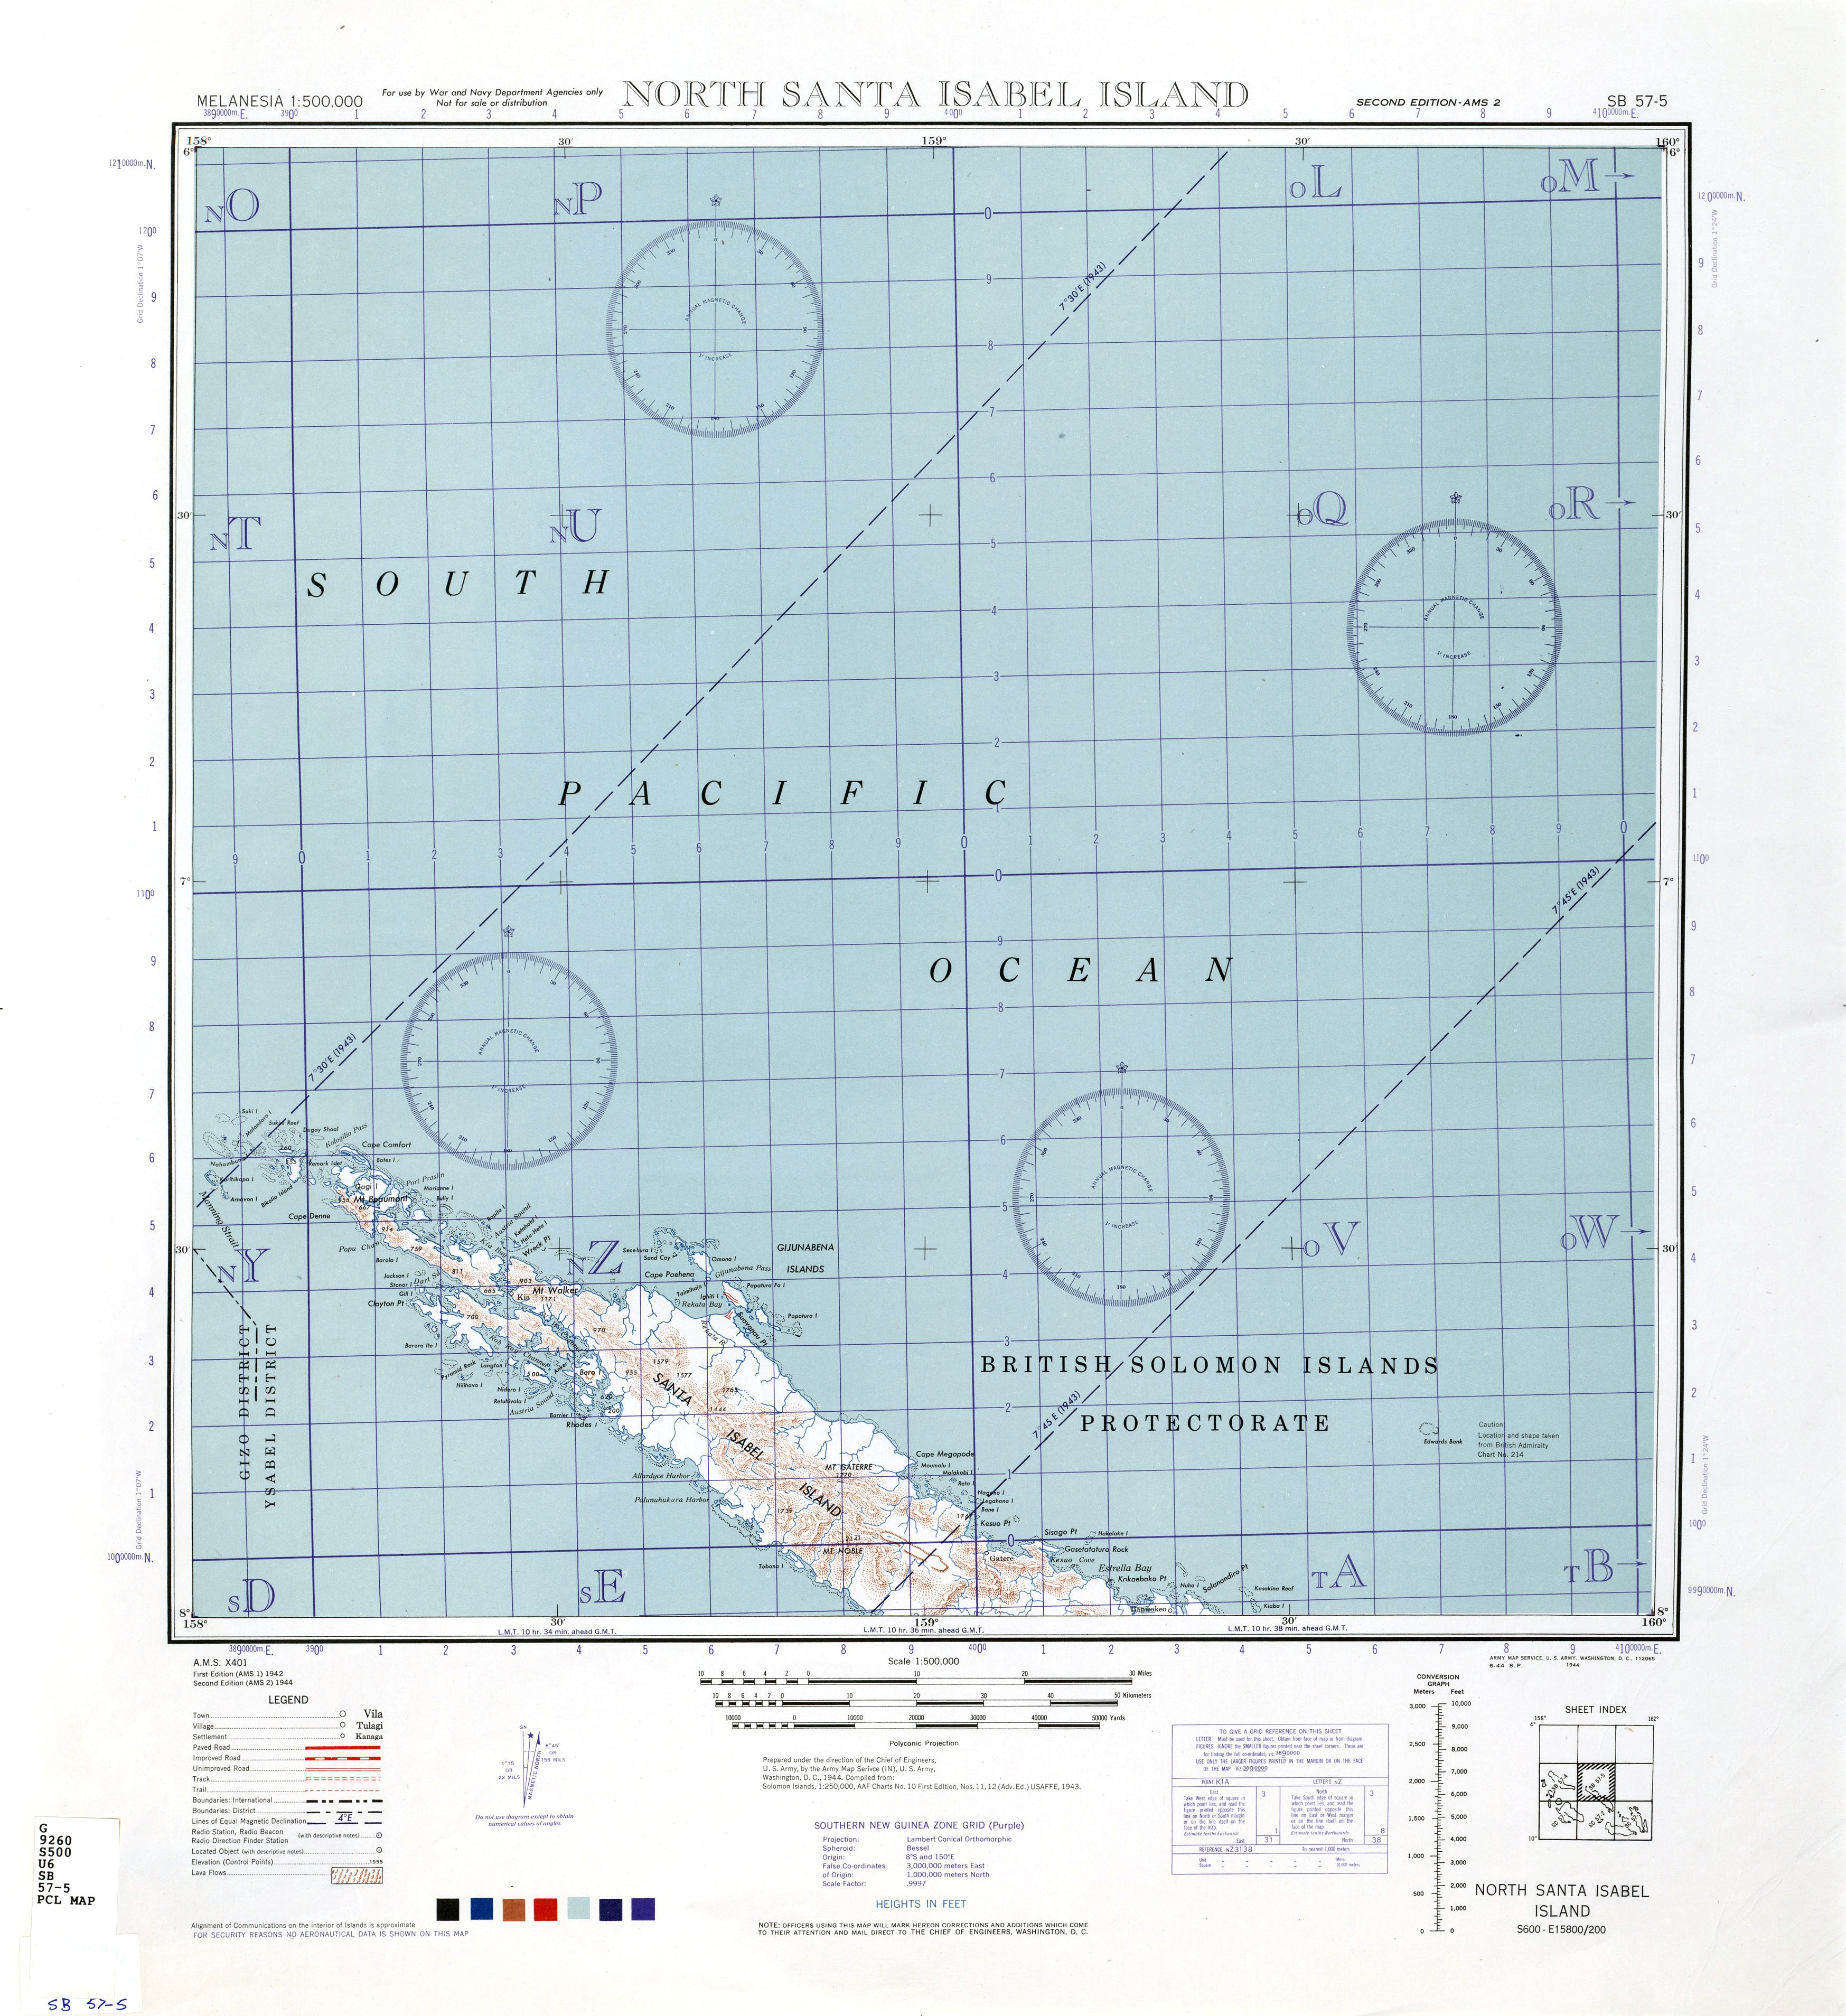 1944 United States Army map of northern Santa Isabel Island in the Solomon Islands.